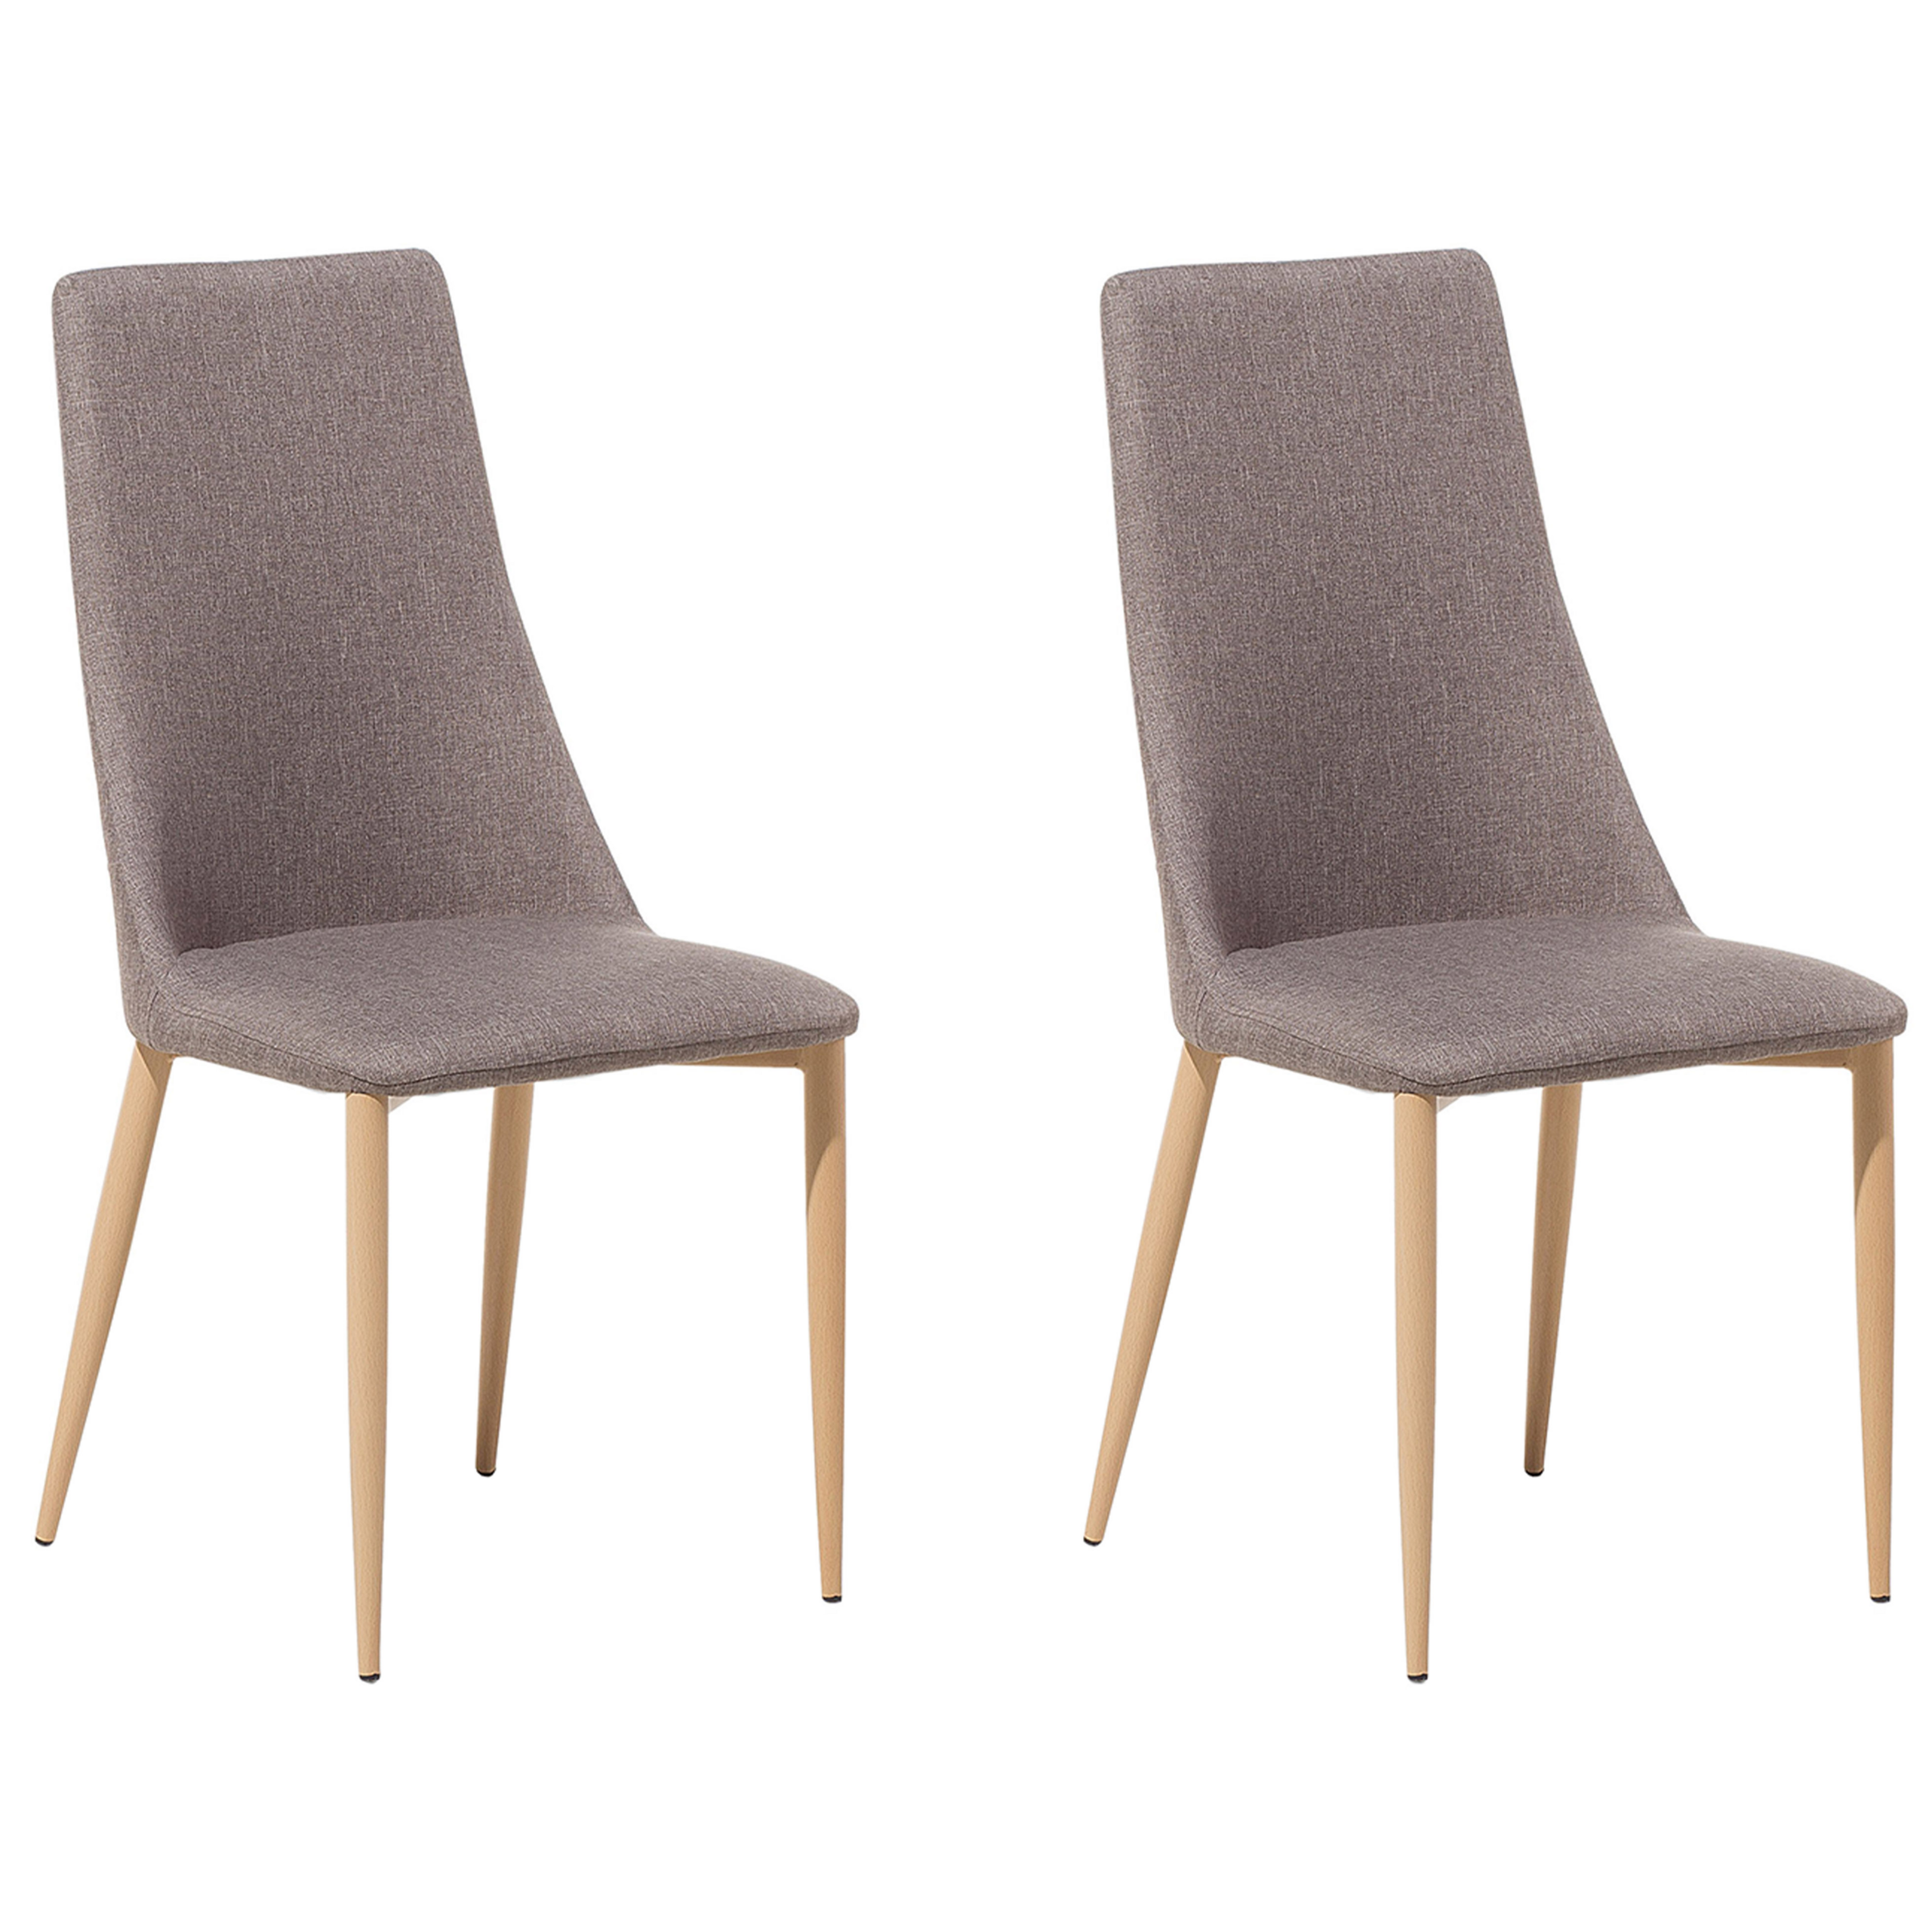 Beliani Set of 2 Dining Chairs Beige Fabric Upholstered Seat High Back